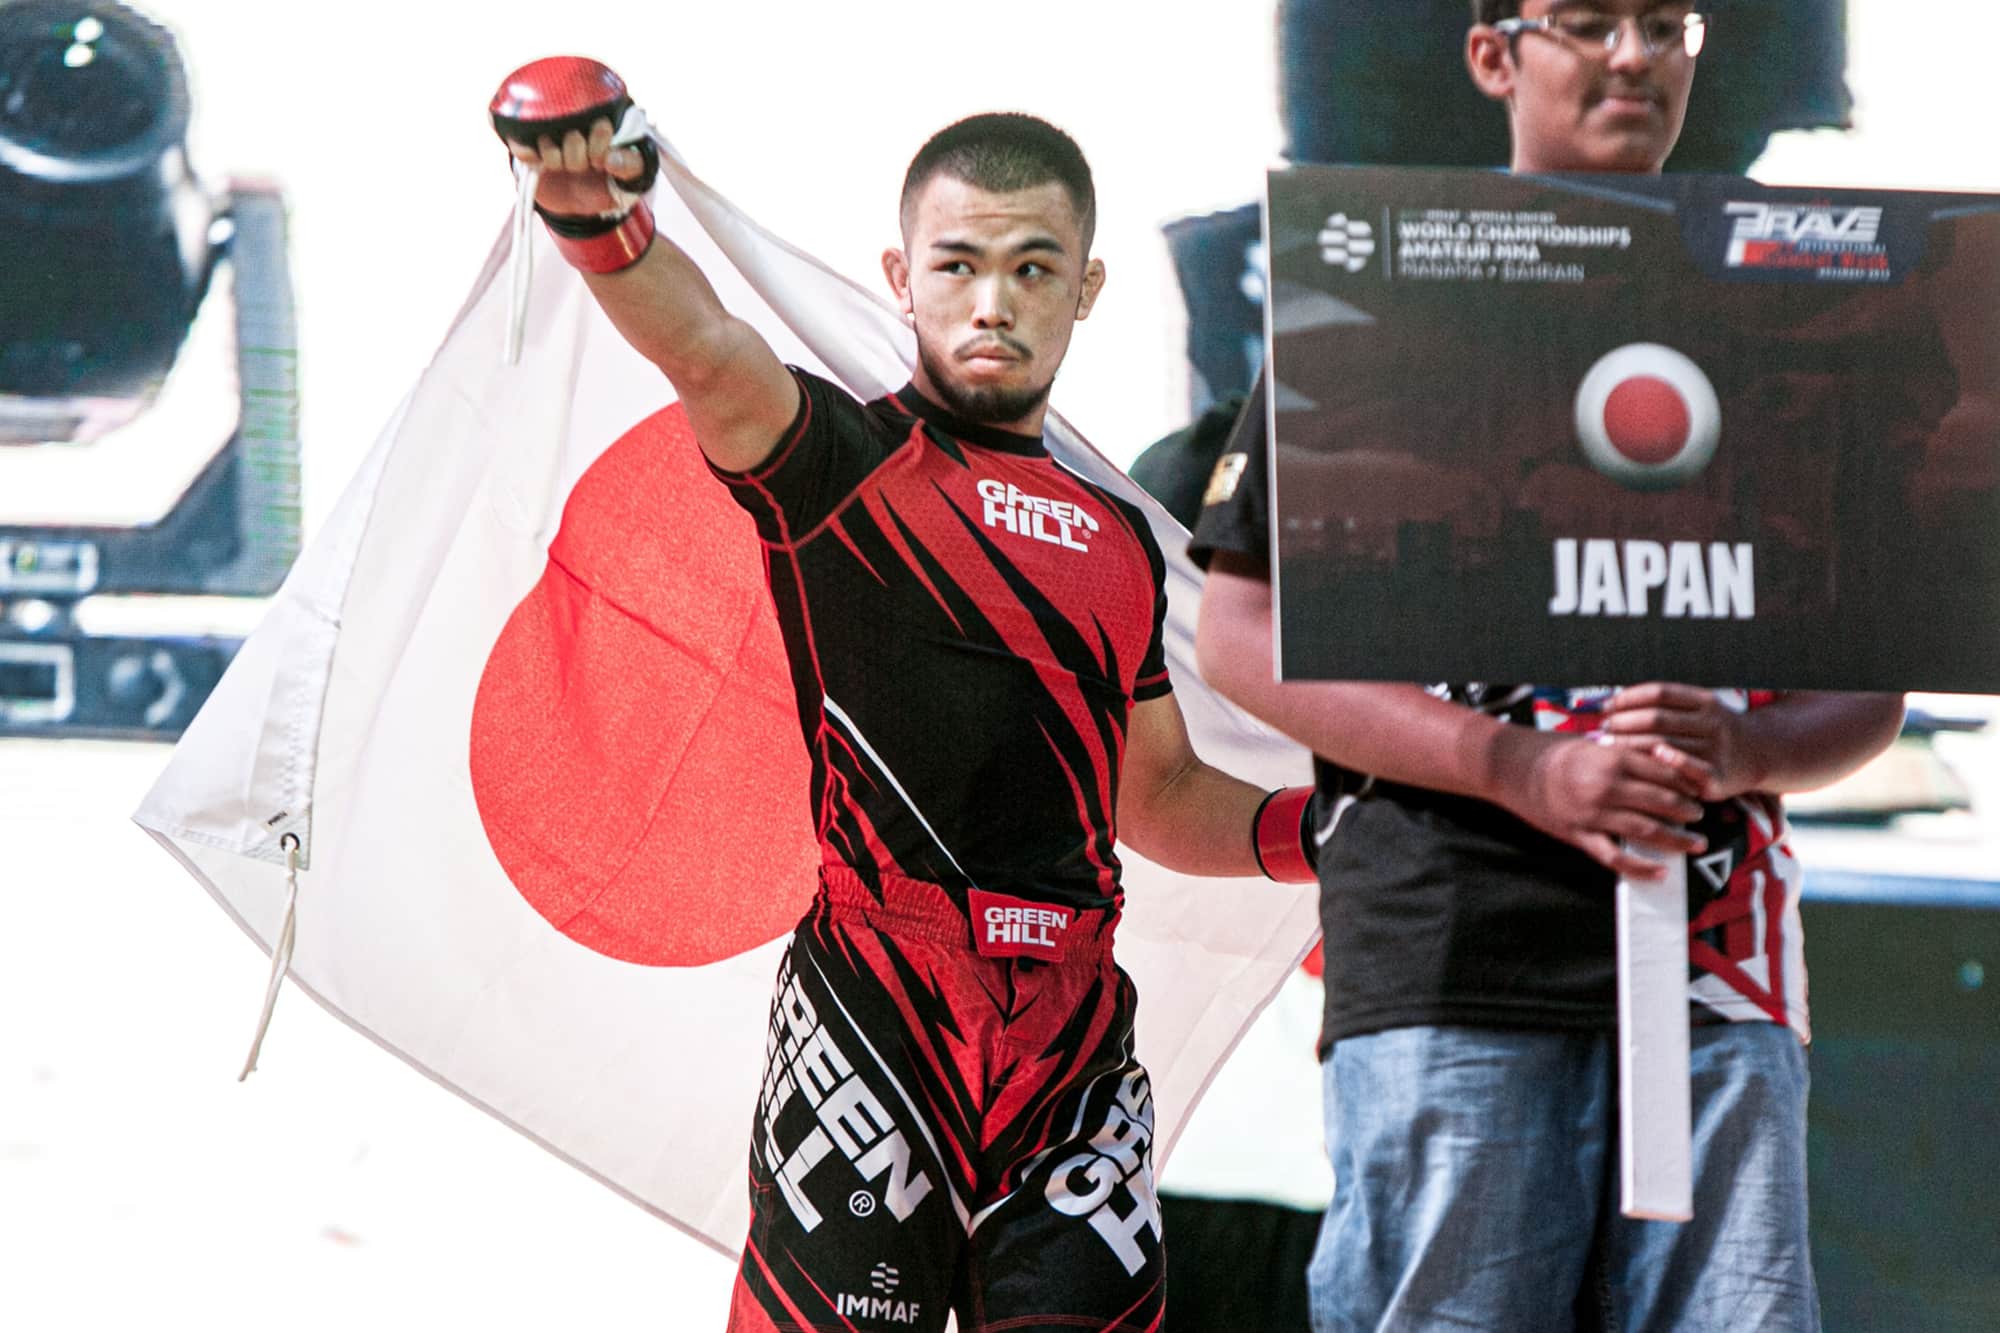 Reo Yamaguchi flying the flag solo for Japan at the World Championships in Abu Dhabi